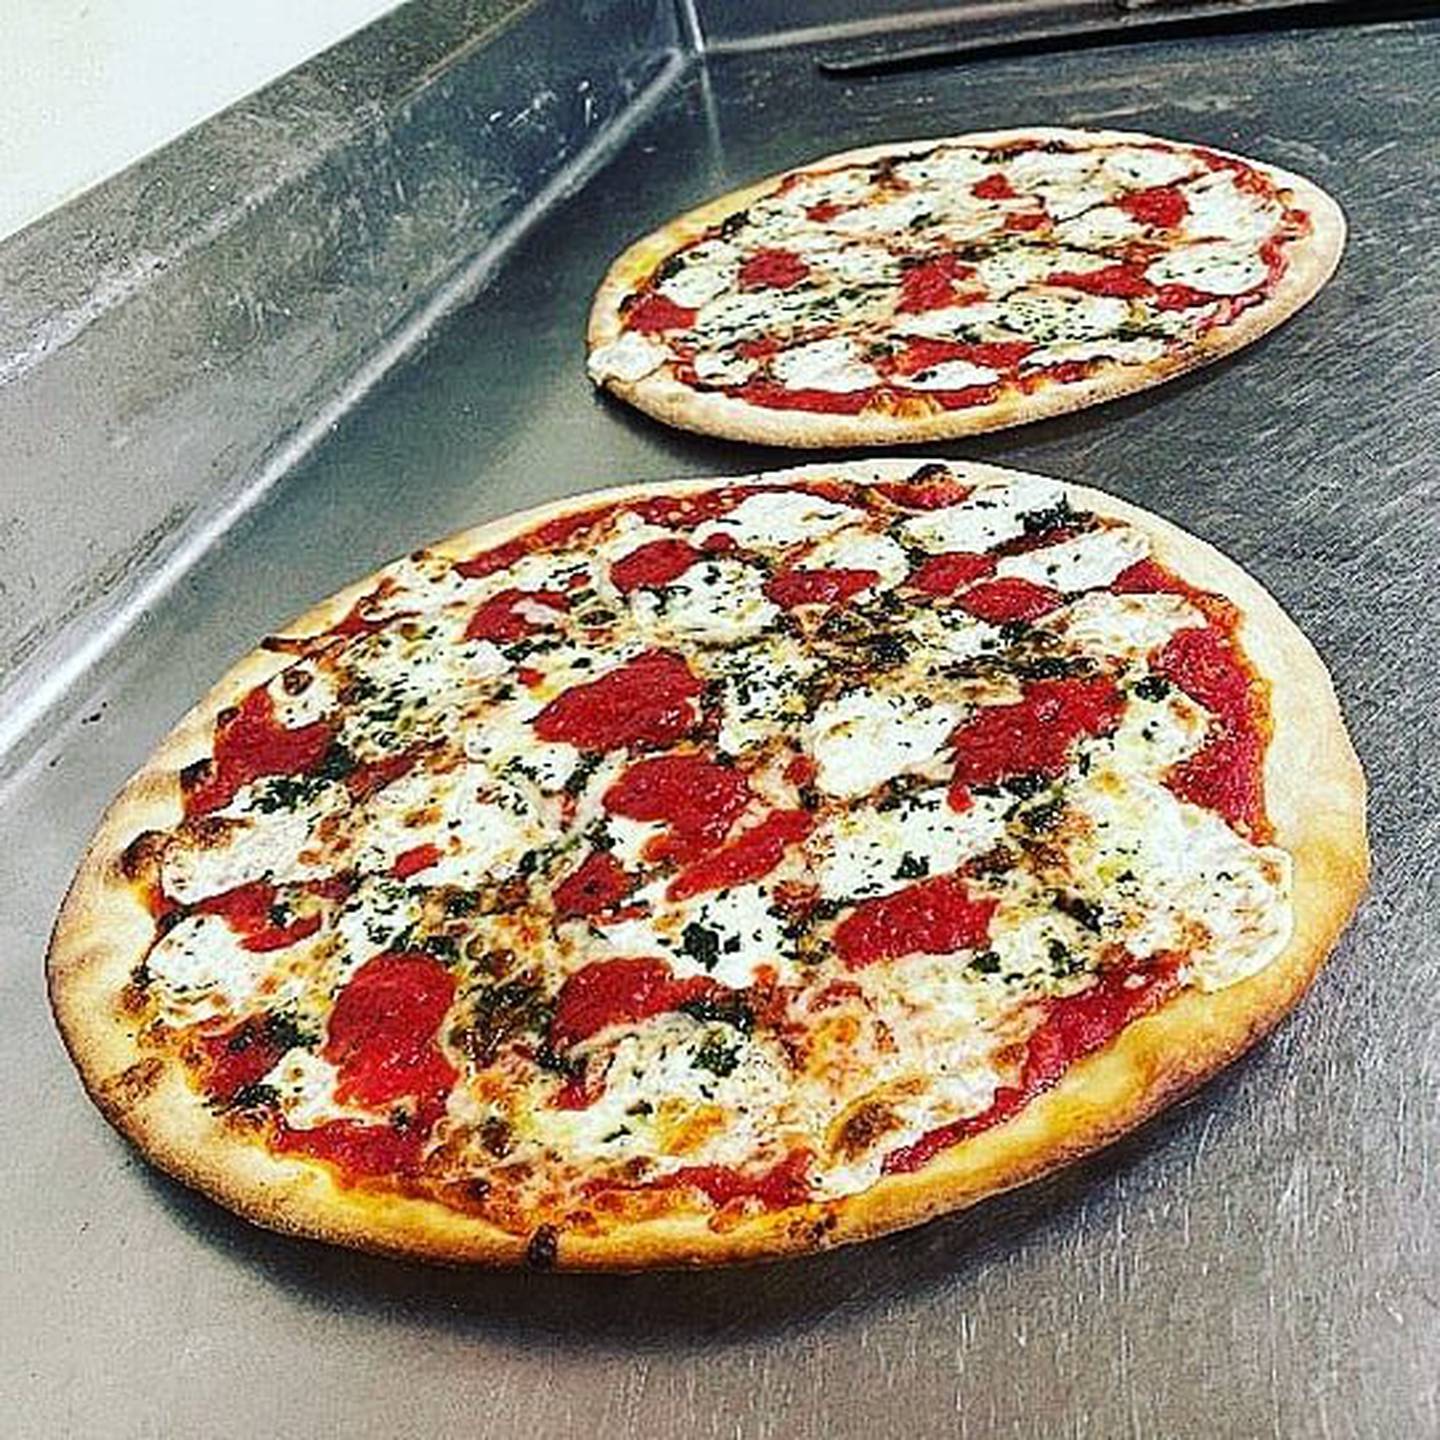 Dino's Pizza and Pasta was voted one of the best pizza places in McHenry County. (Photo from Dino's Pizza and Pasta Facebook page)